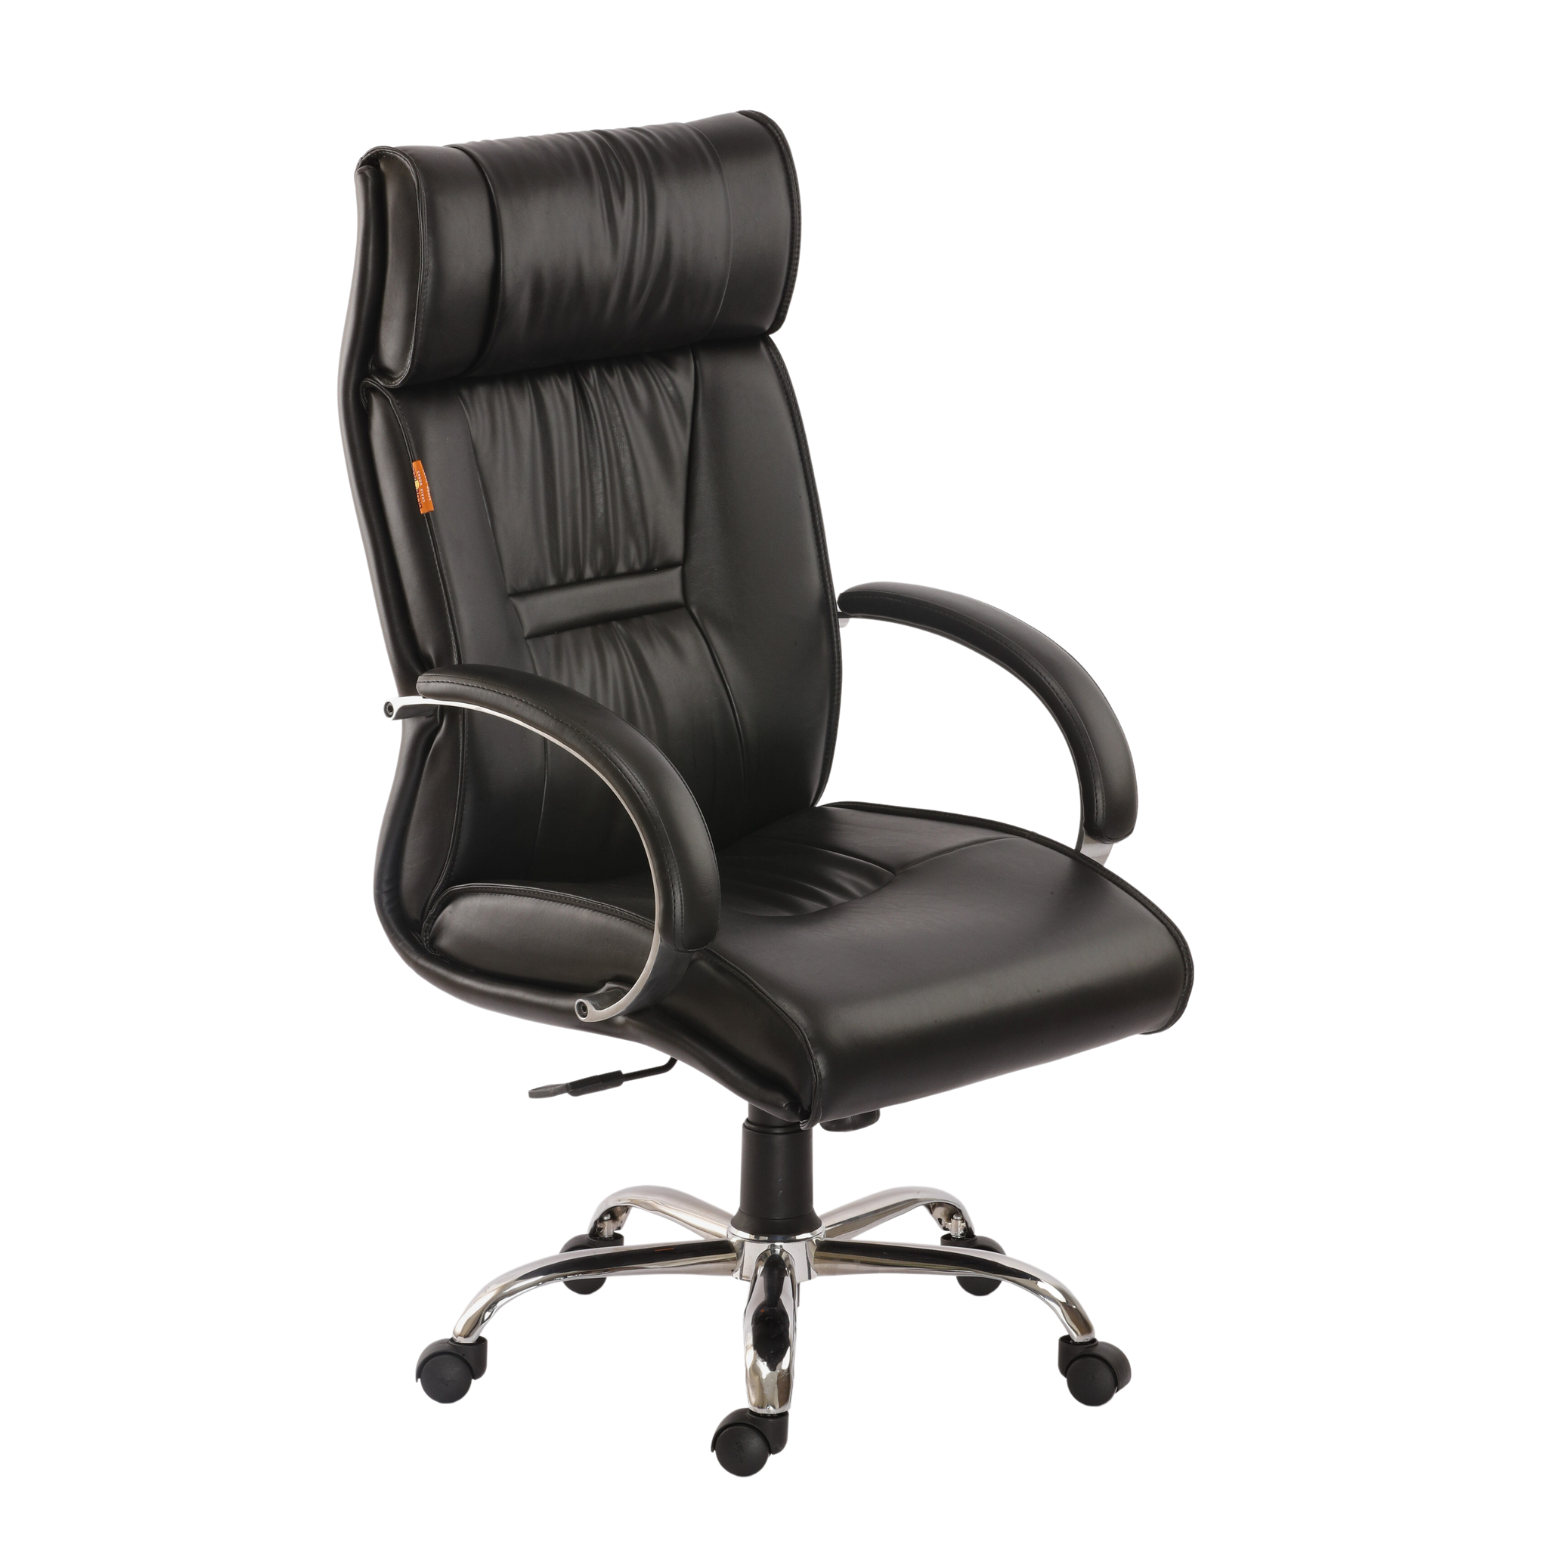 Premium Executive Chair - Ergonomic Design with 360 Degree Swivel Function and Rich Leatherite Upholstery.